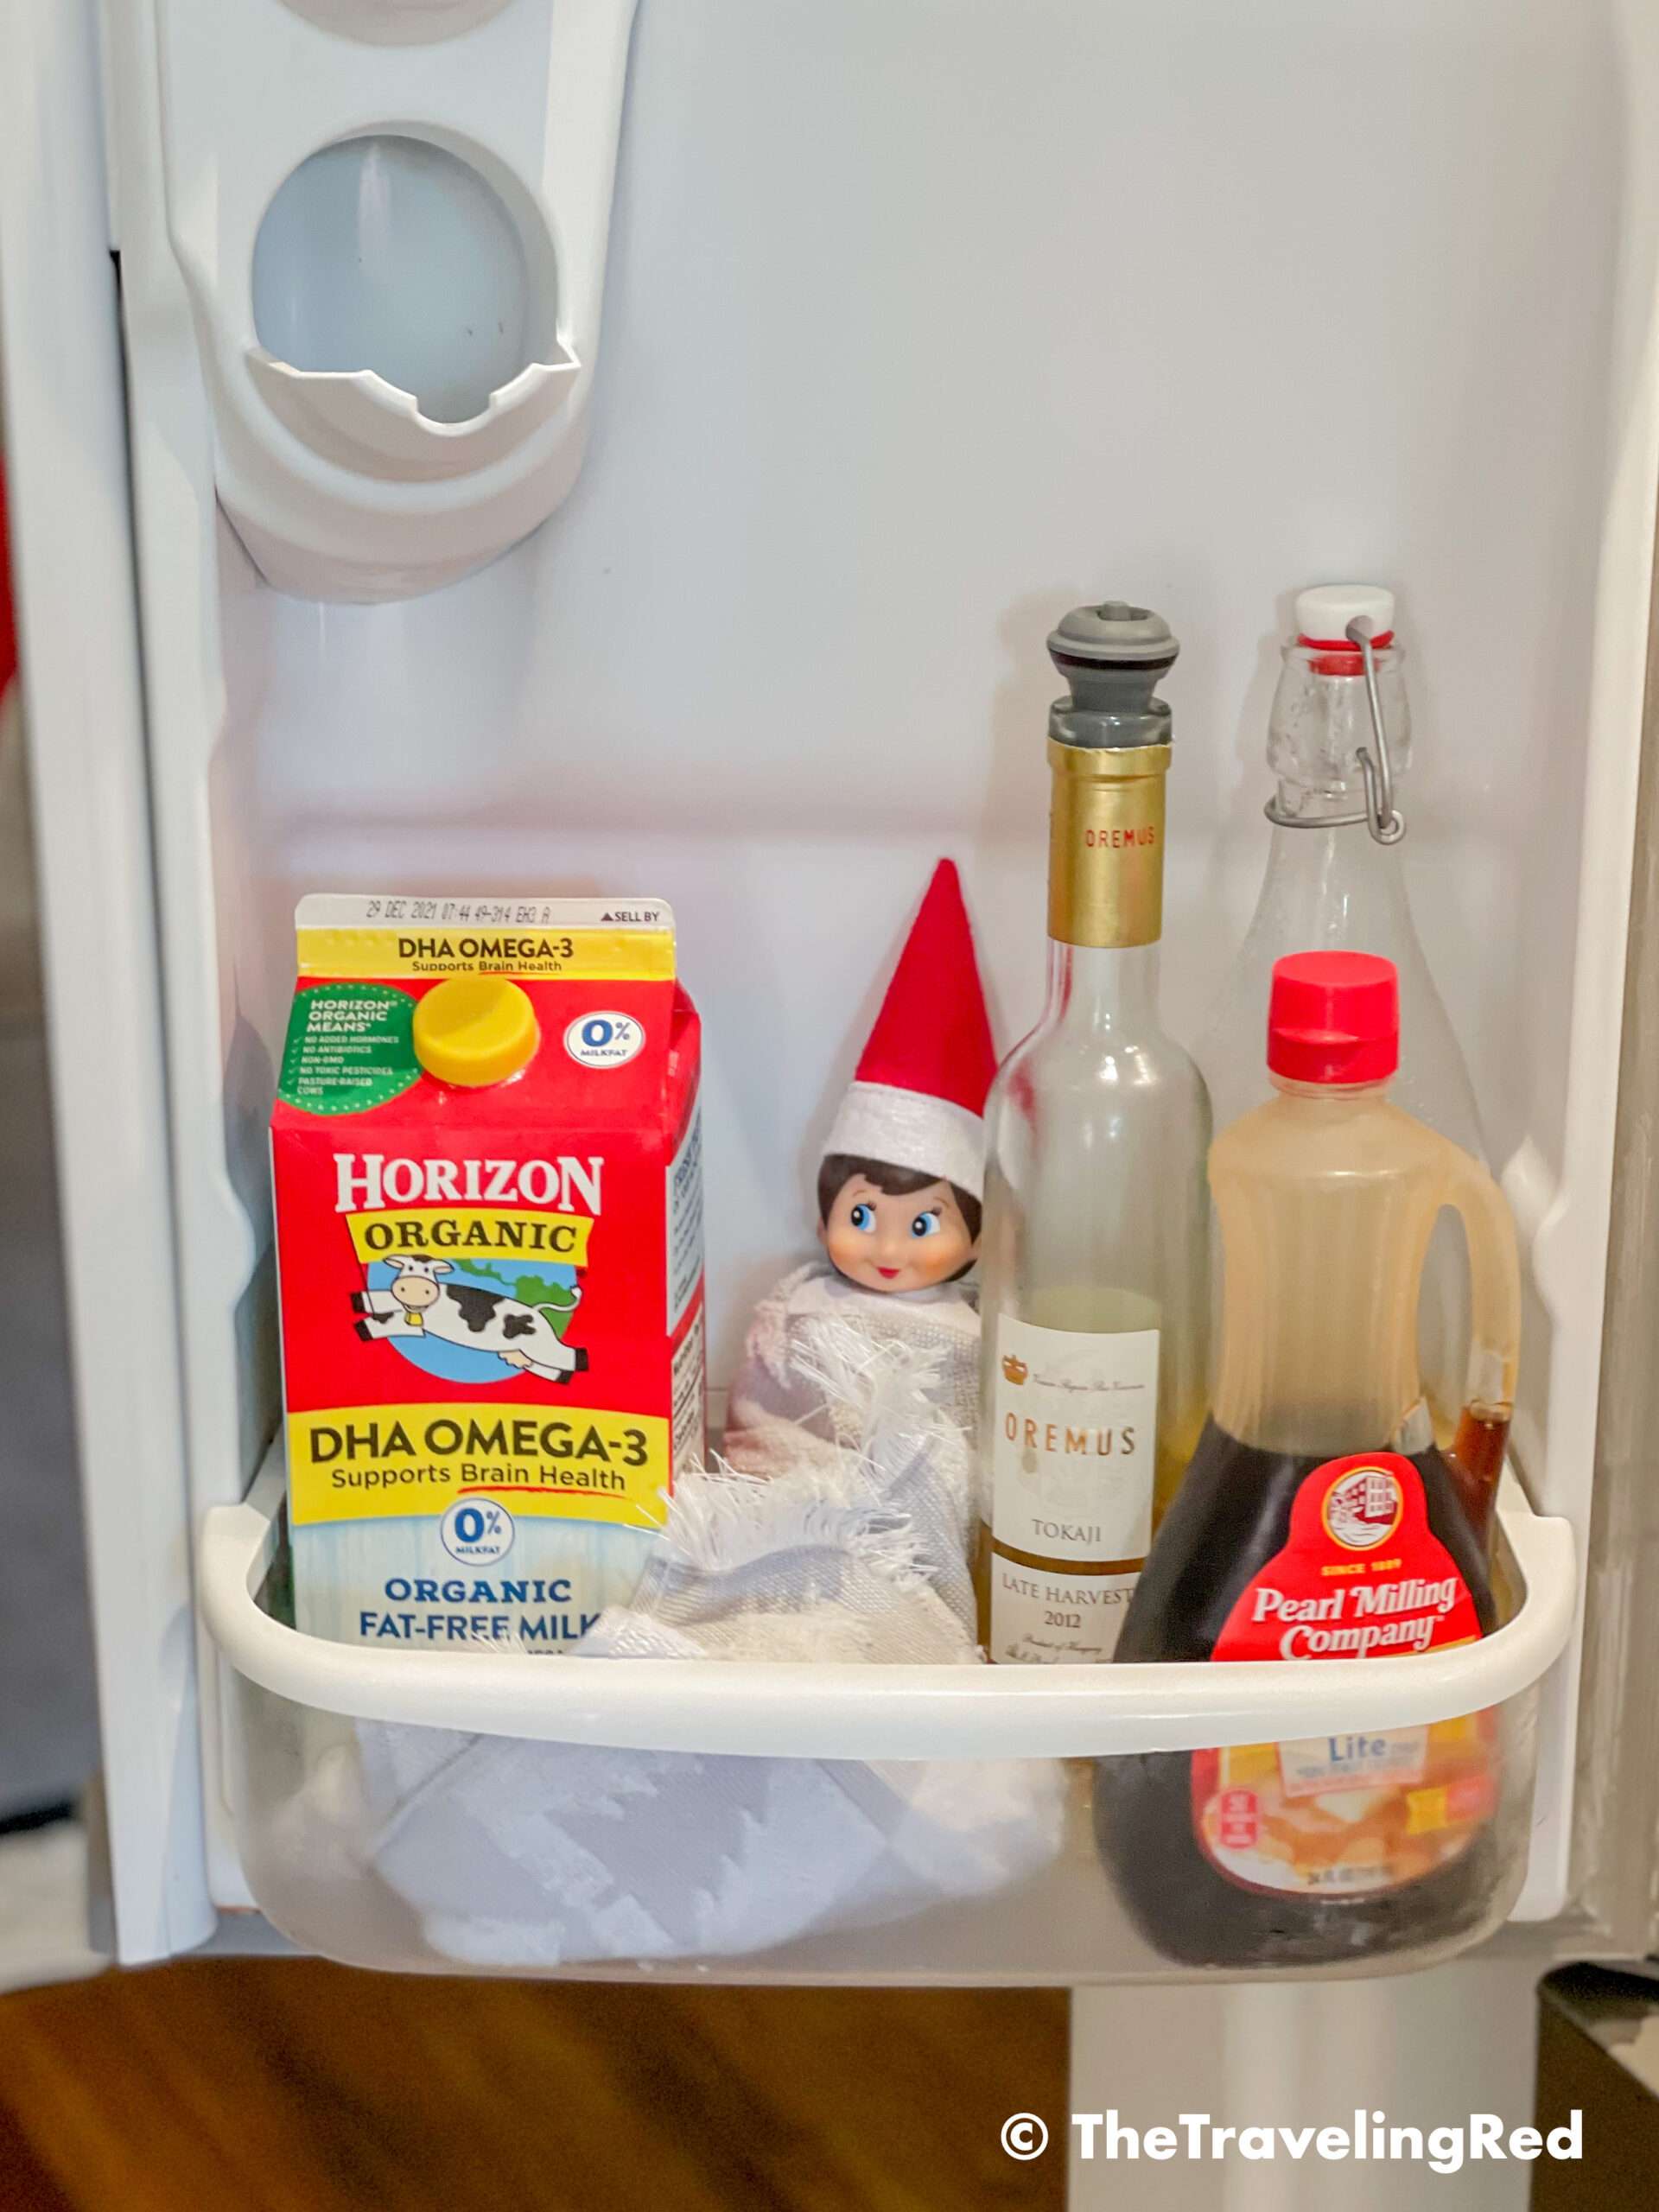 Naughty Elf on the shelf hiding in the fridge using a kitchen hand towel as a blanket. Fun and easy elf on the shelf ideas for a naughty elf that are quick and easy using things you have at home.